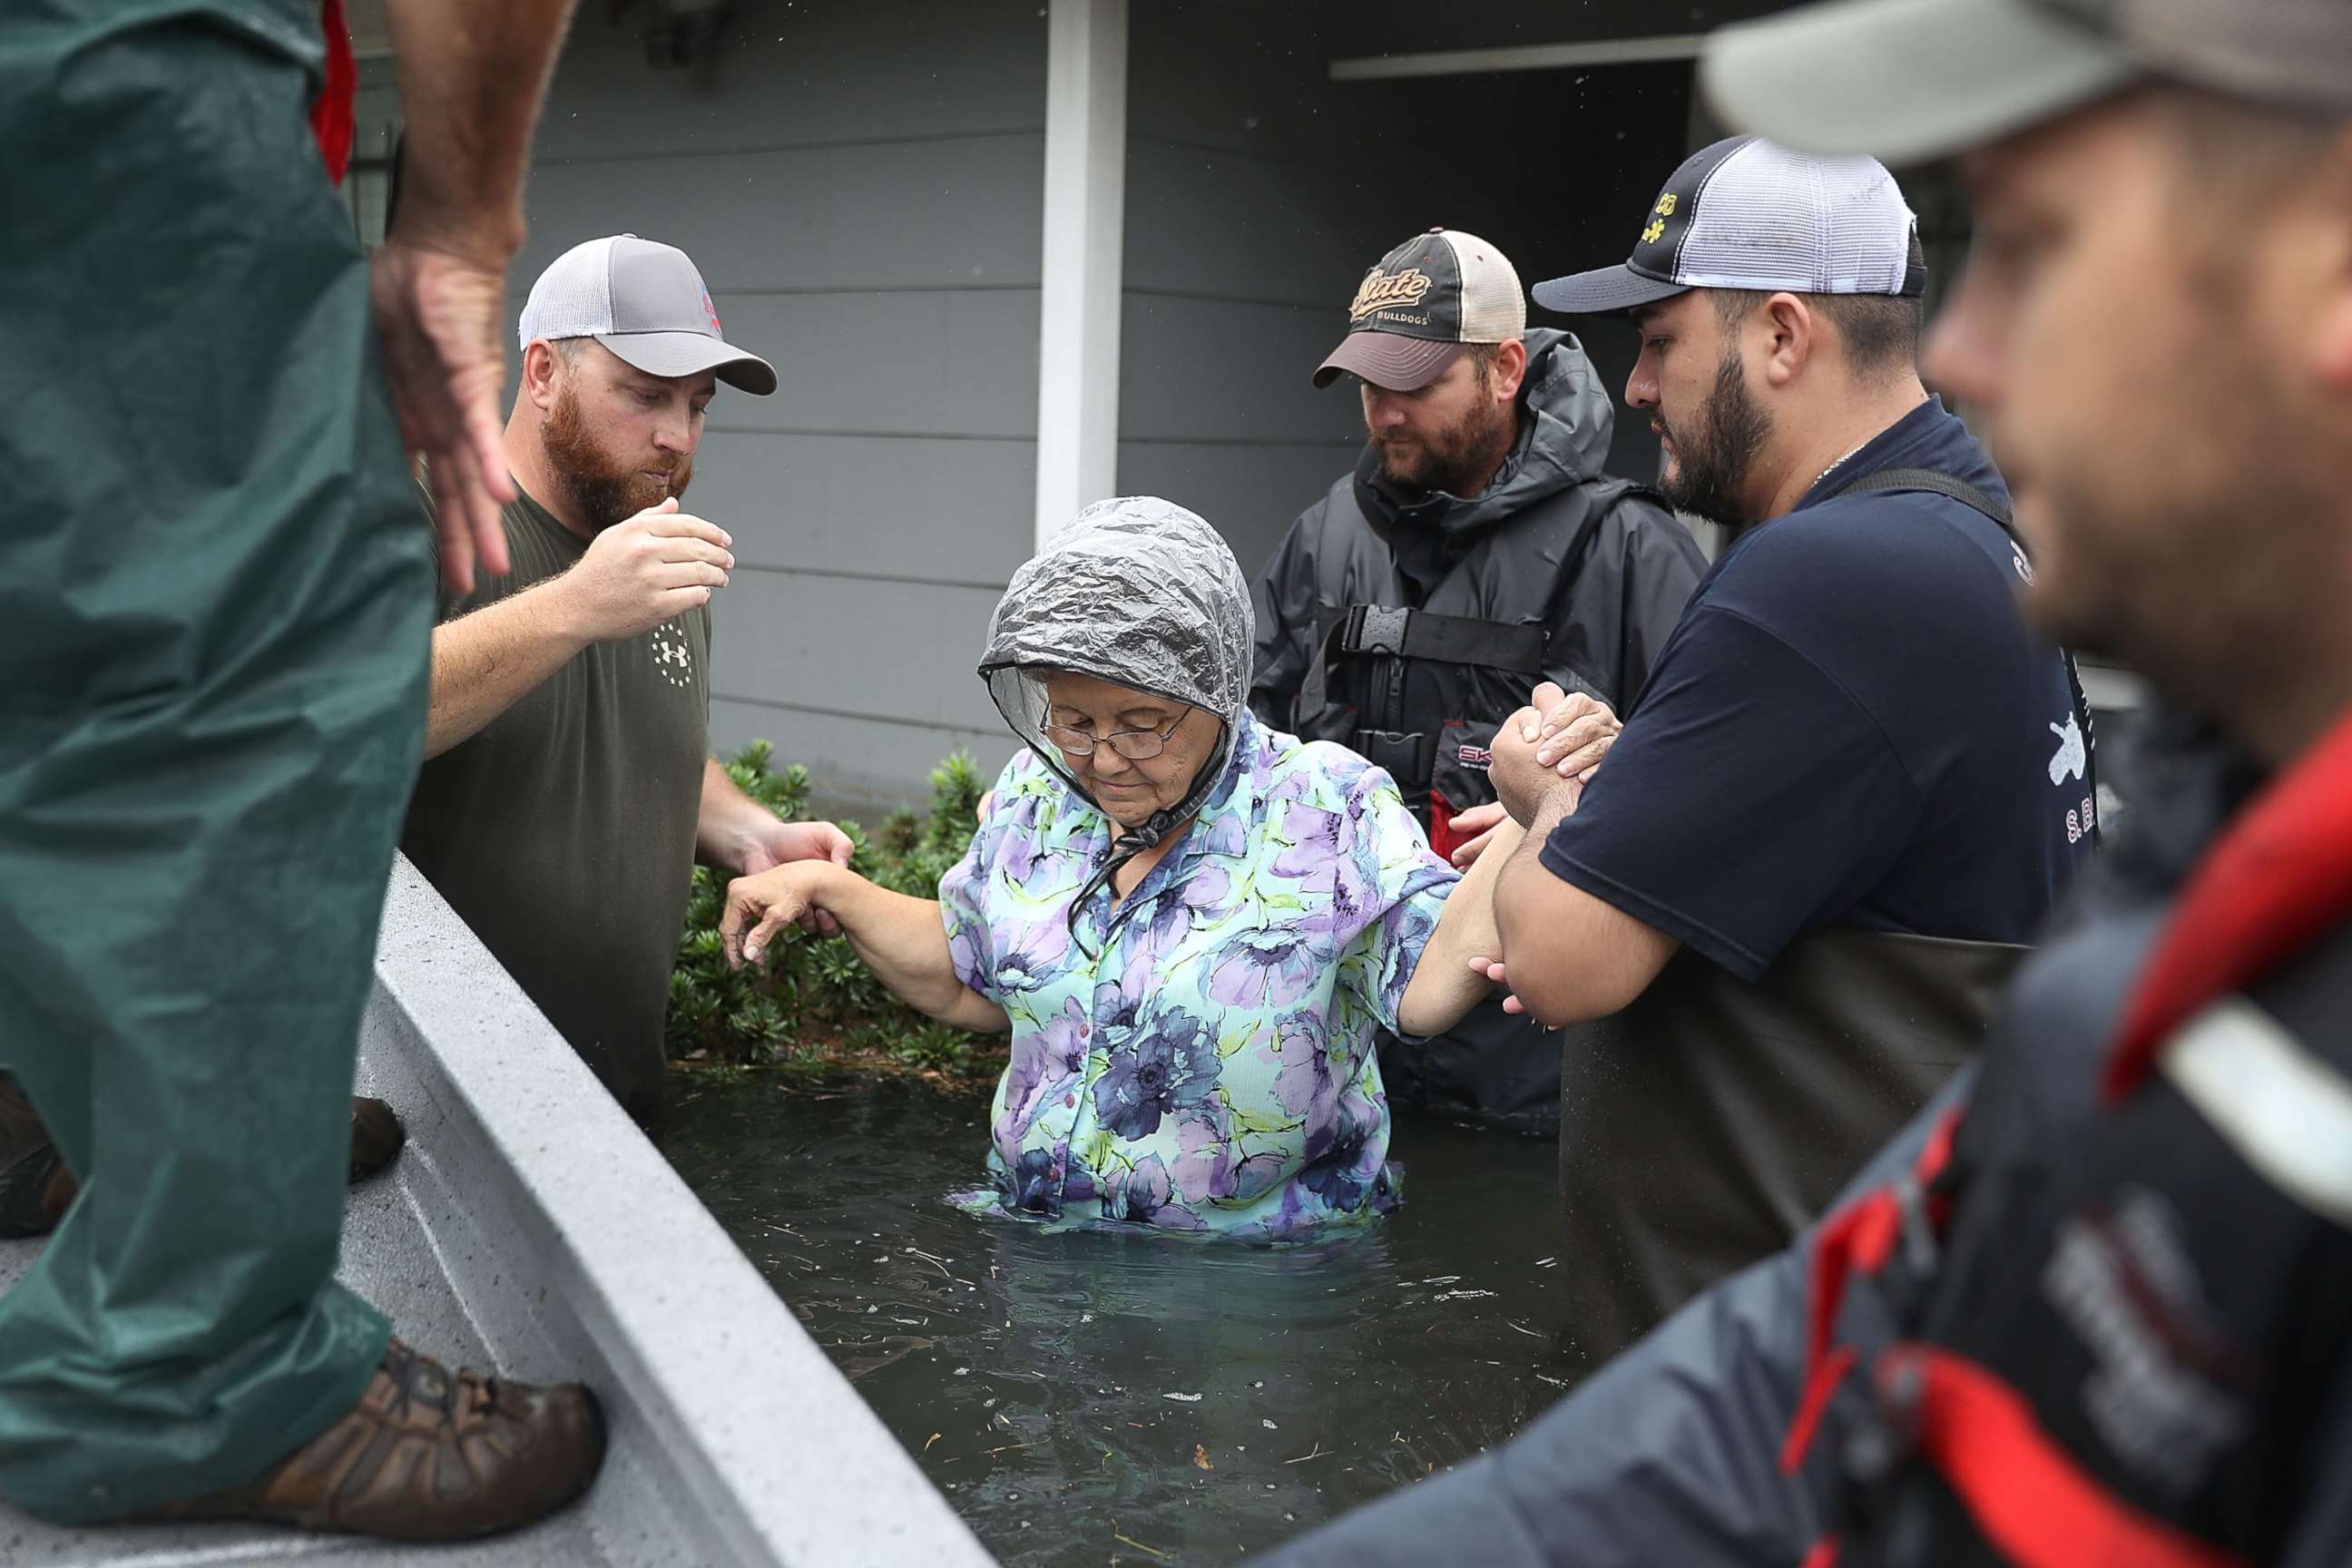 PHOTO: Volunteer rescuer workers help a woman from her home that was inundated with the flooding of Hurricane Harvey, Aug. 30, 2017 in Port Arthur, Texas.